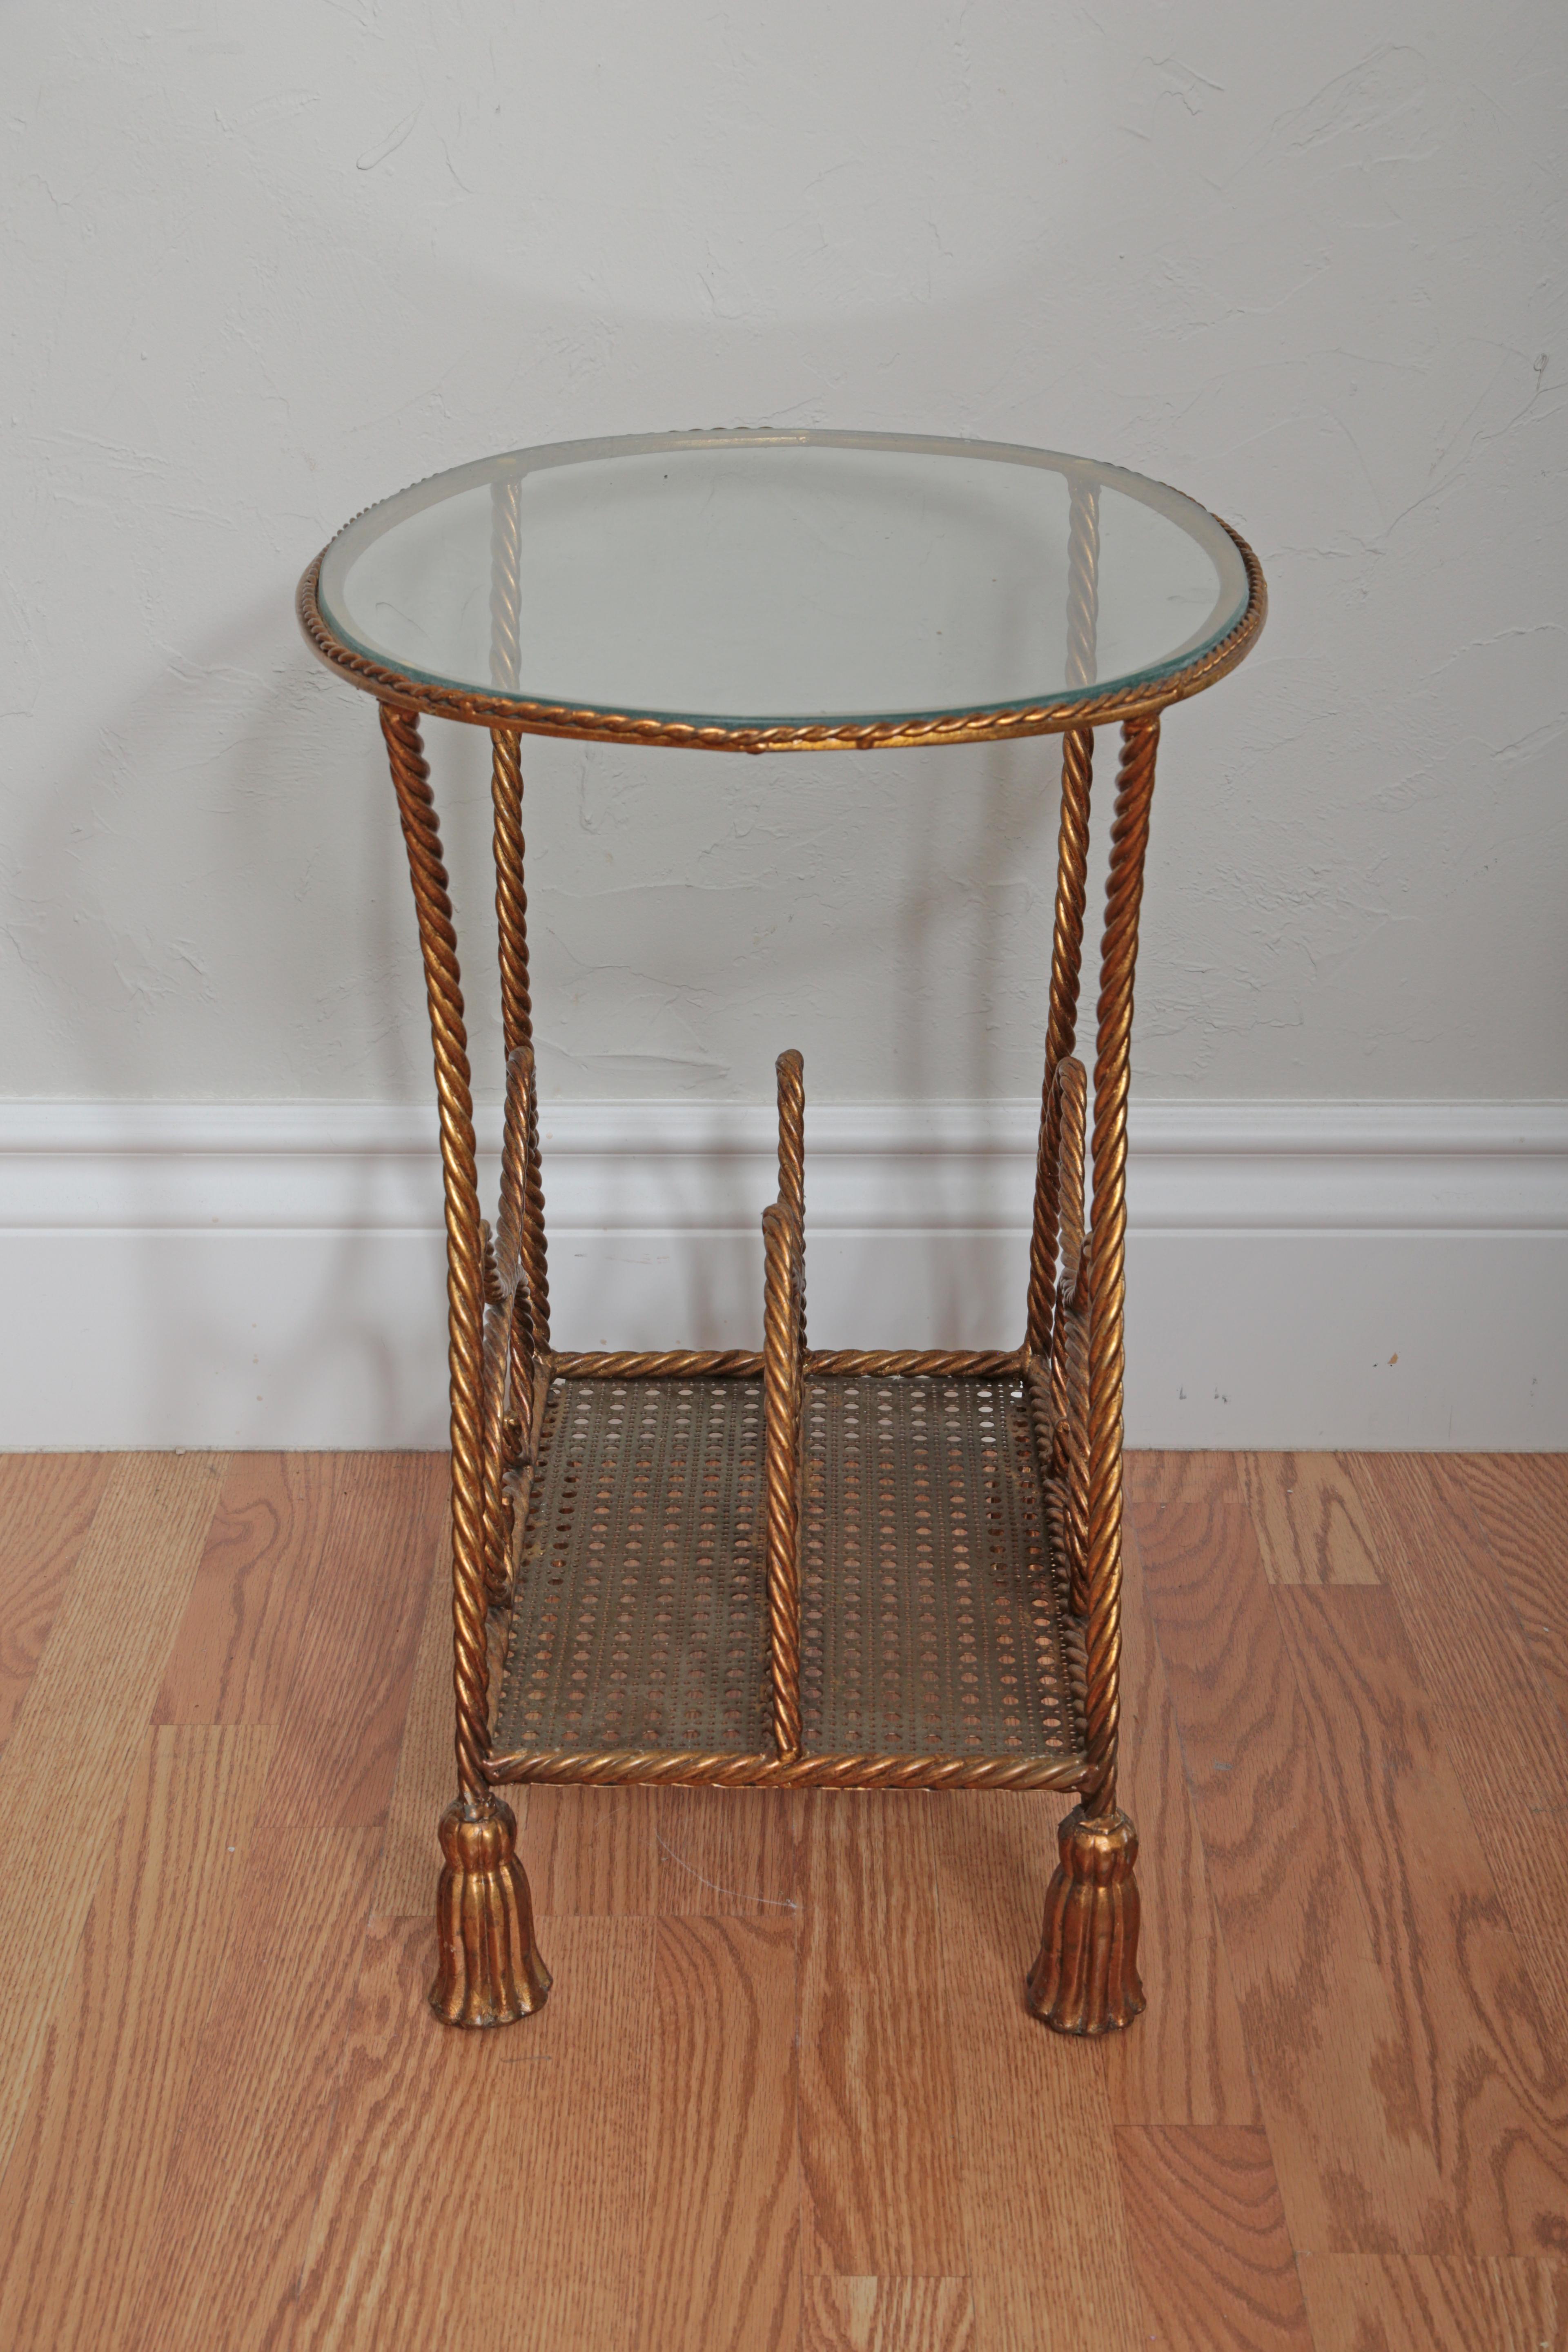 Italian Gilt Metal Rope and Tassel Magazine Holder Table In Good Condition For Sale In West Palm Beach, FL